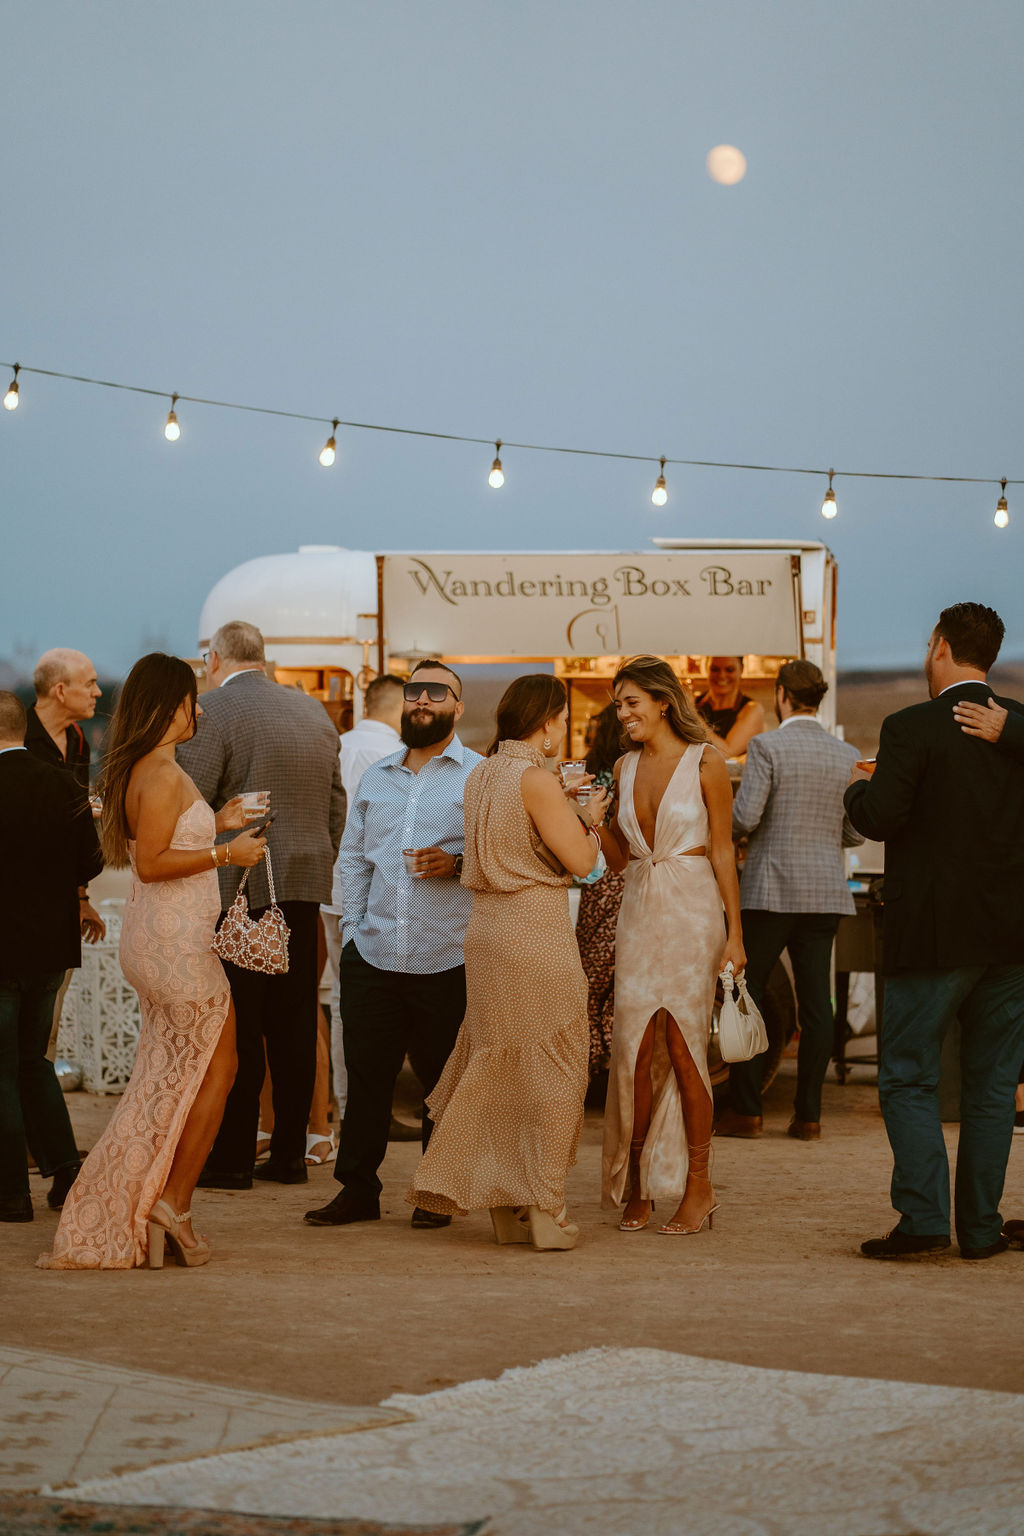 Wandering Box Bar with Bistro Lighting and Moon while Guests Drink